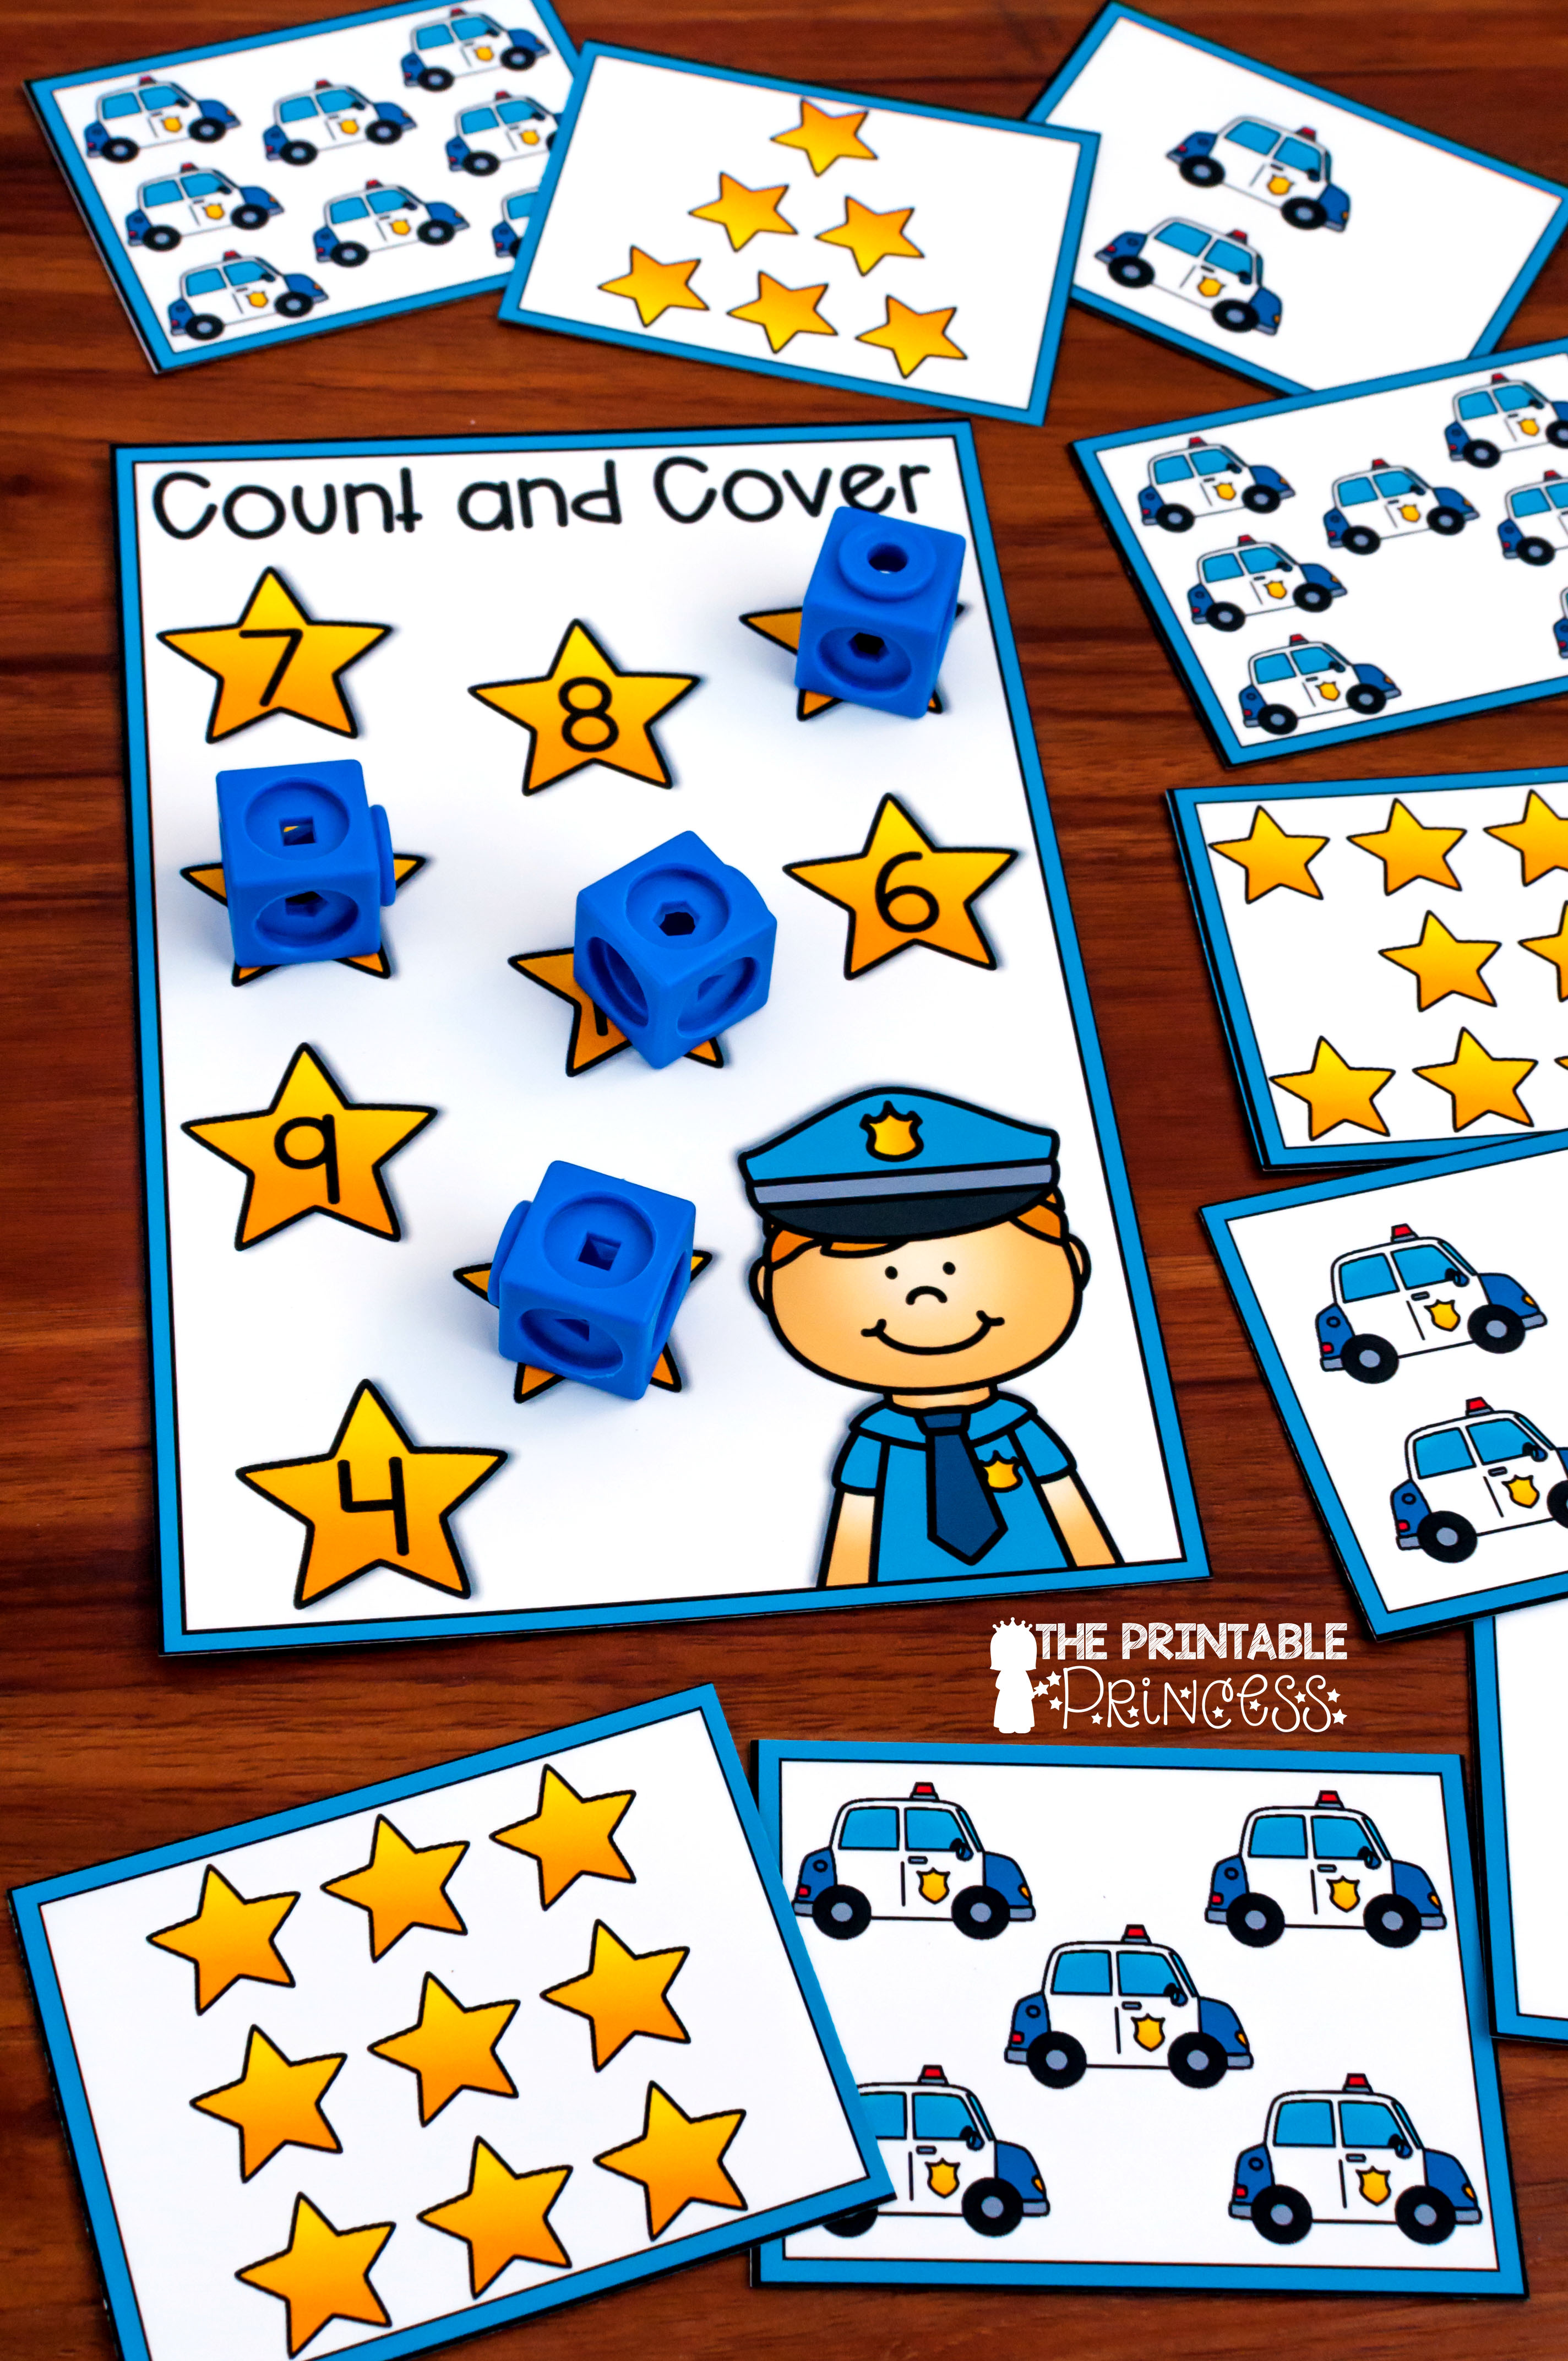 Community helpers activities with a freebie! If you're planning a Kindergarten community helpers unit, you'll want to check this post out. Click to find read aloud suggestions, center ideas, and a community helpers freebie!